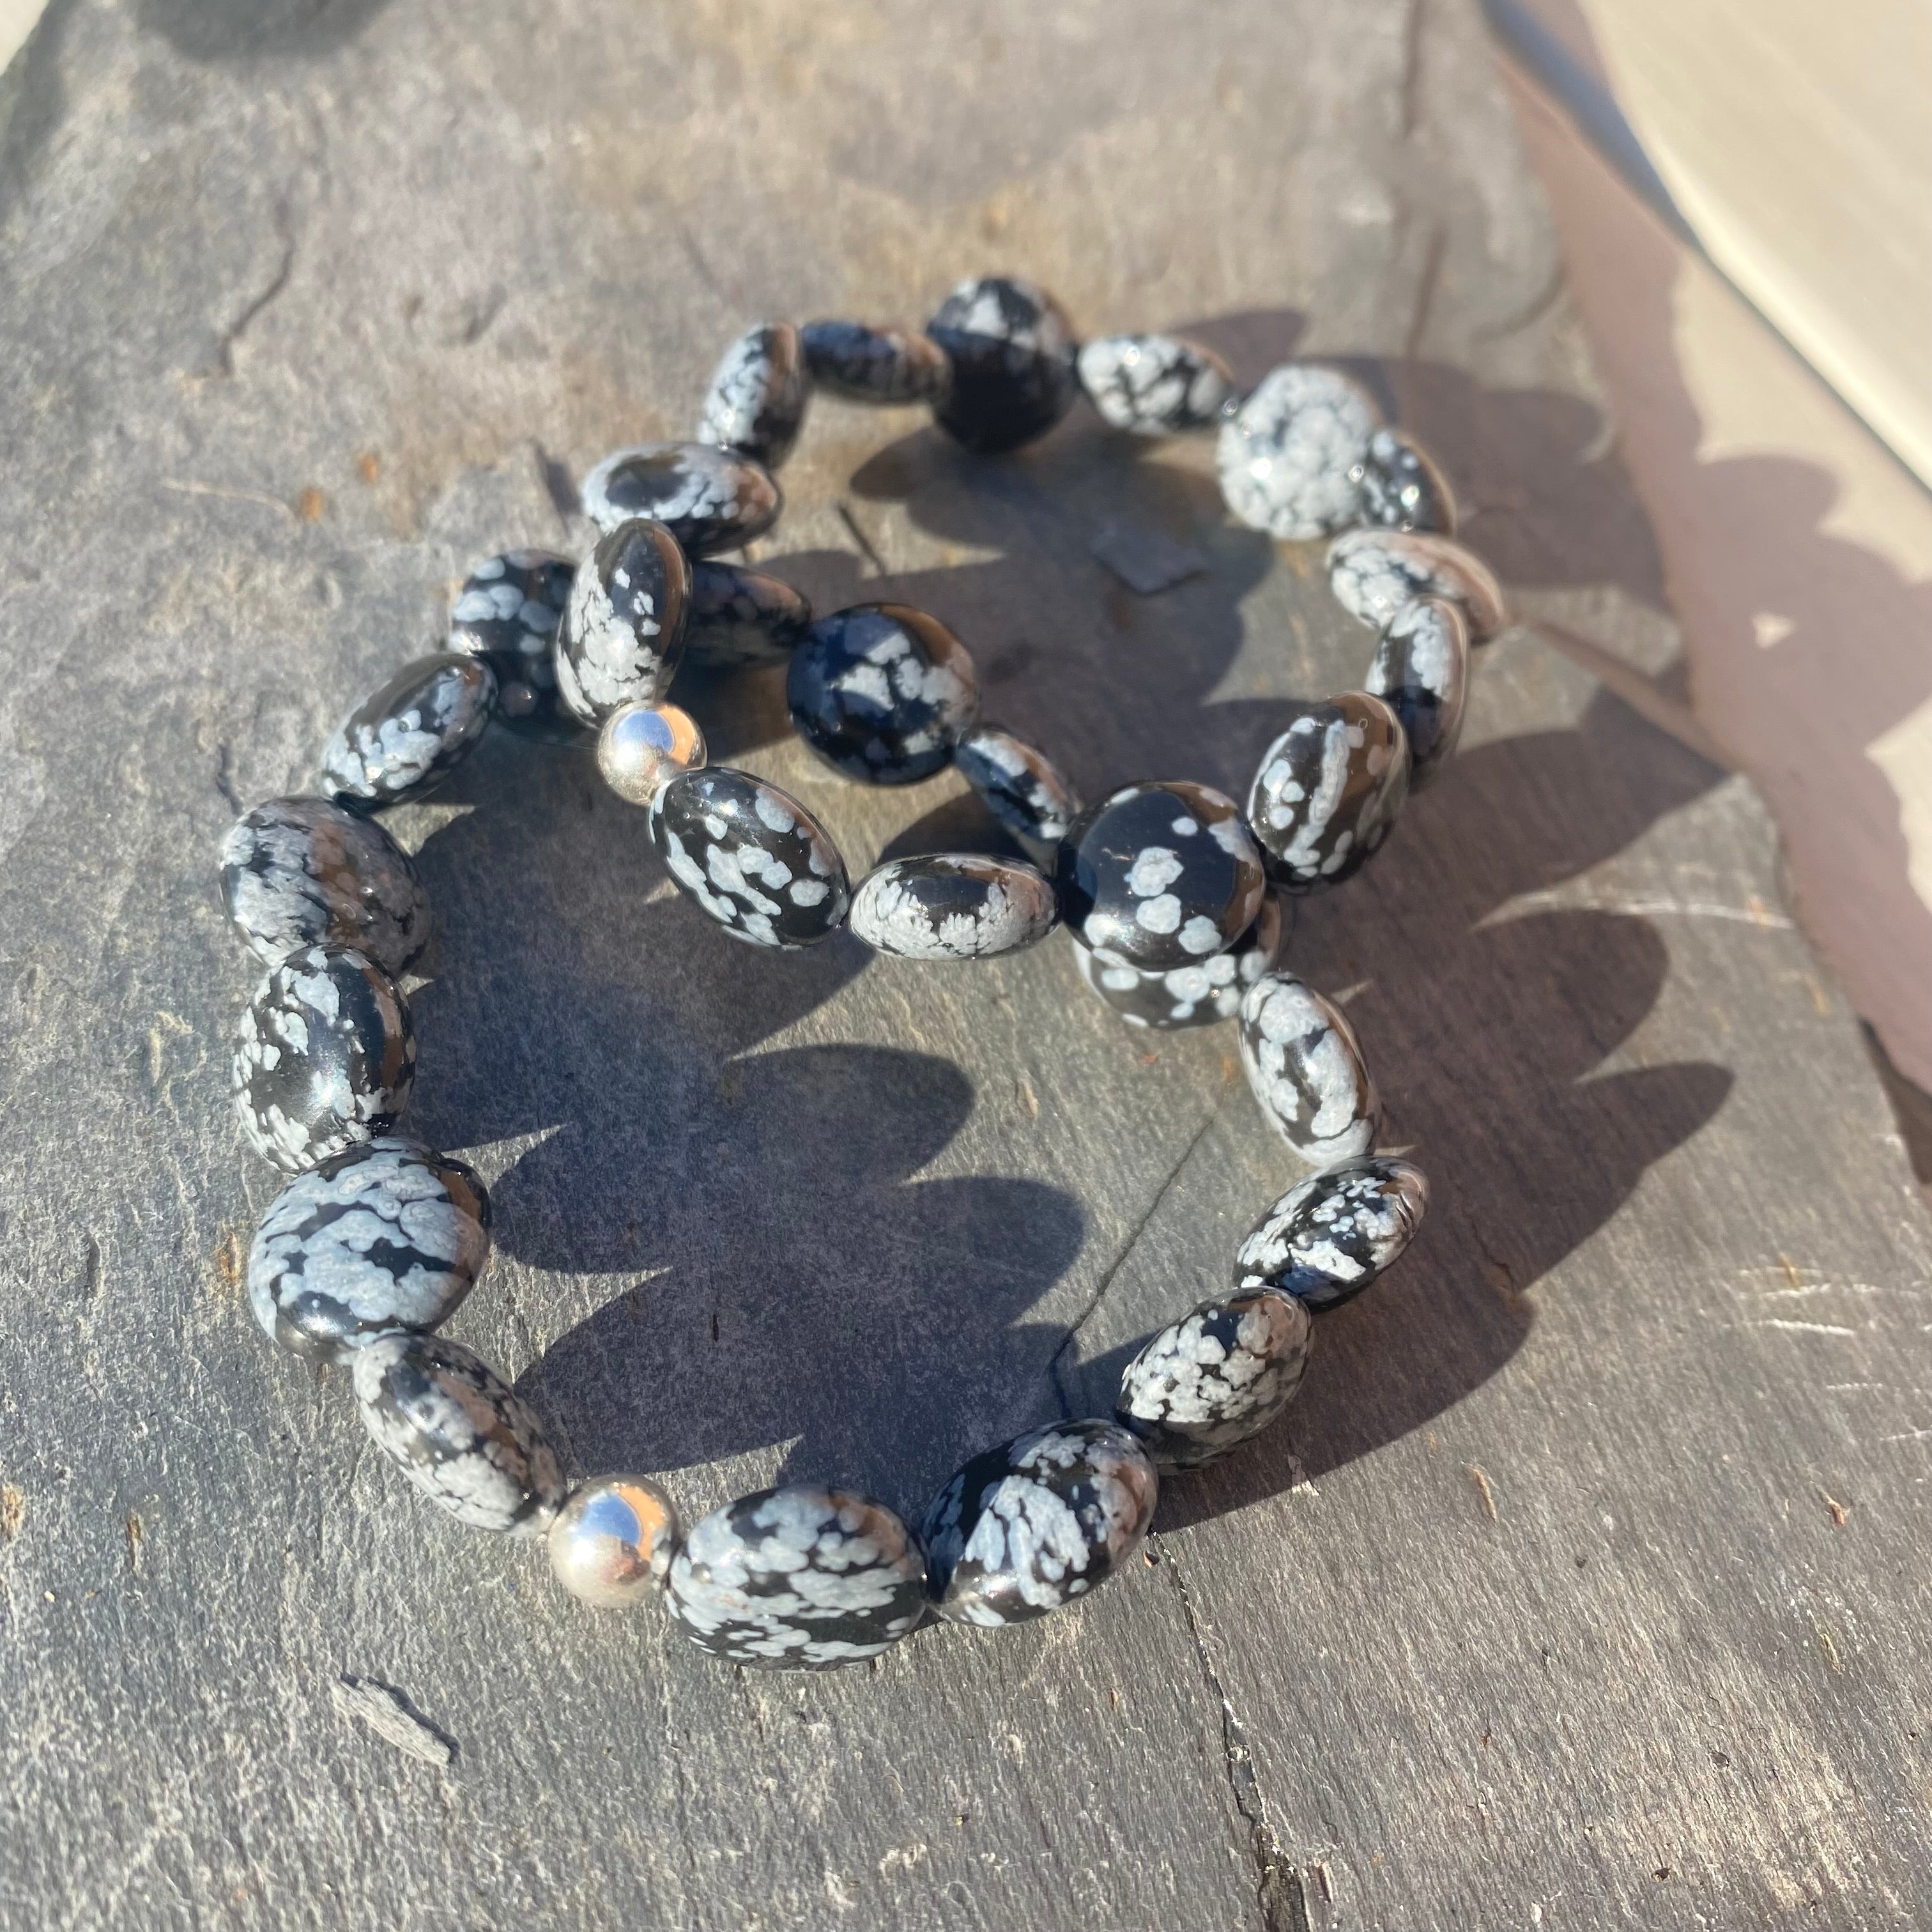 Snowflake Obsidian Bracelet - Gemstone Coin Beads with silver spacer - Crystal Healing Jewellery